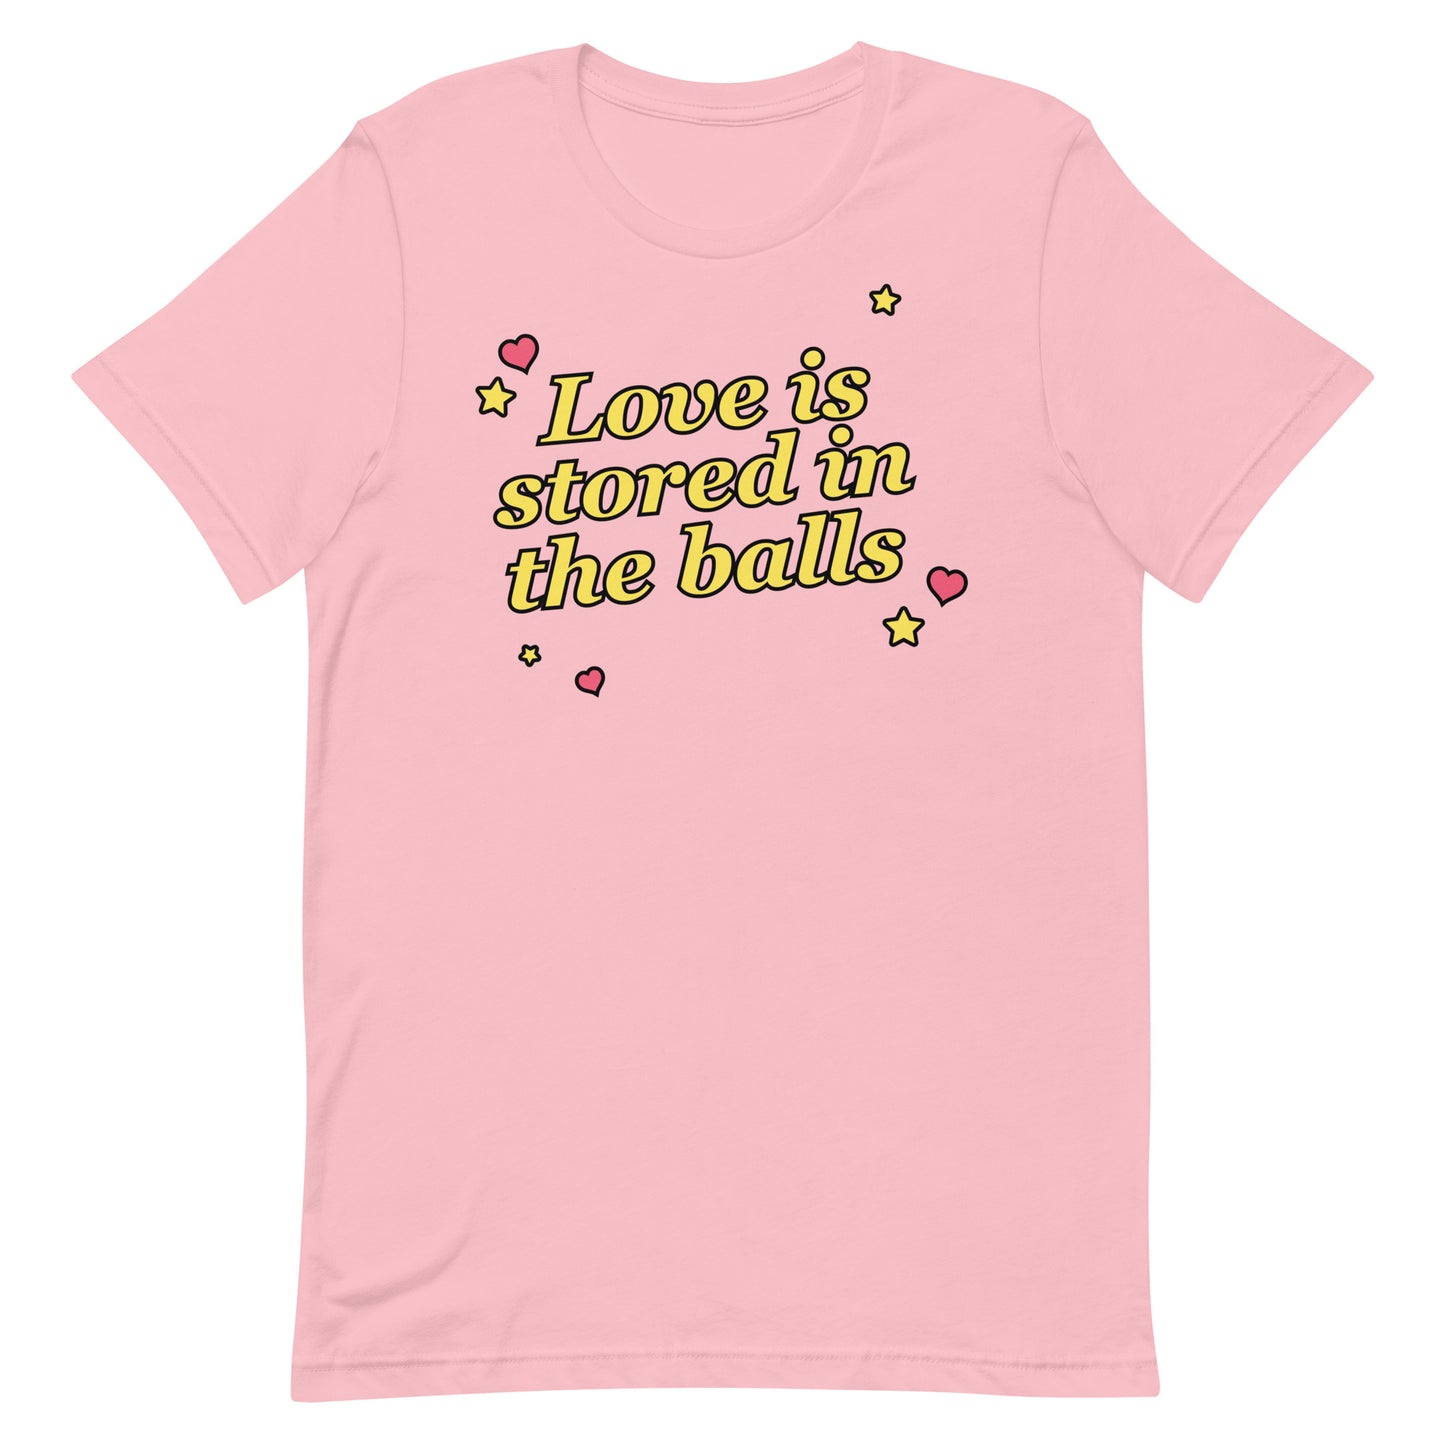 Love is Stored in the Balls Unisex t-shirt